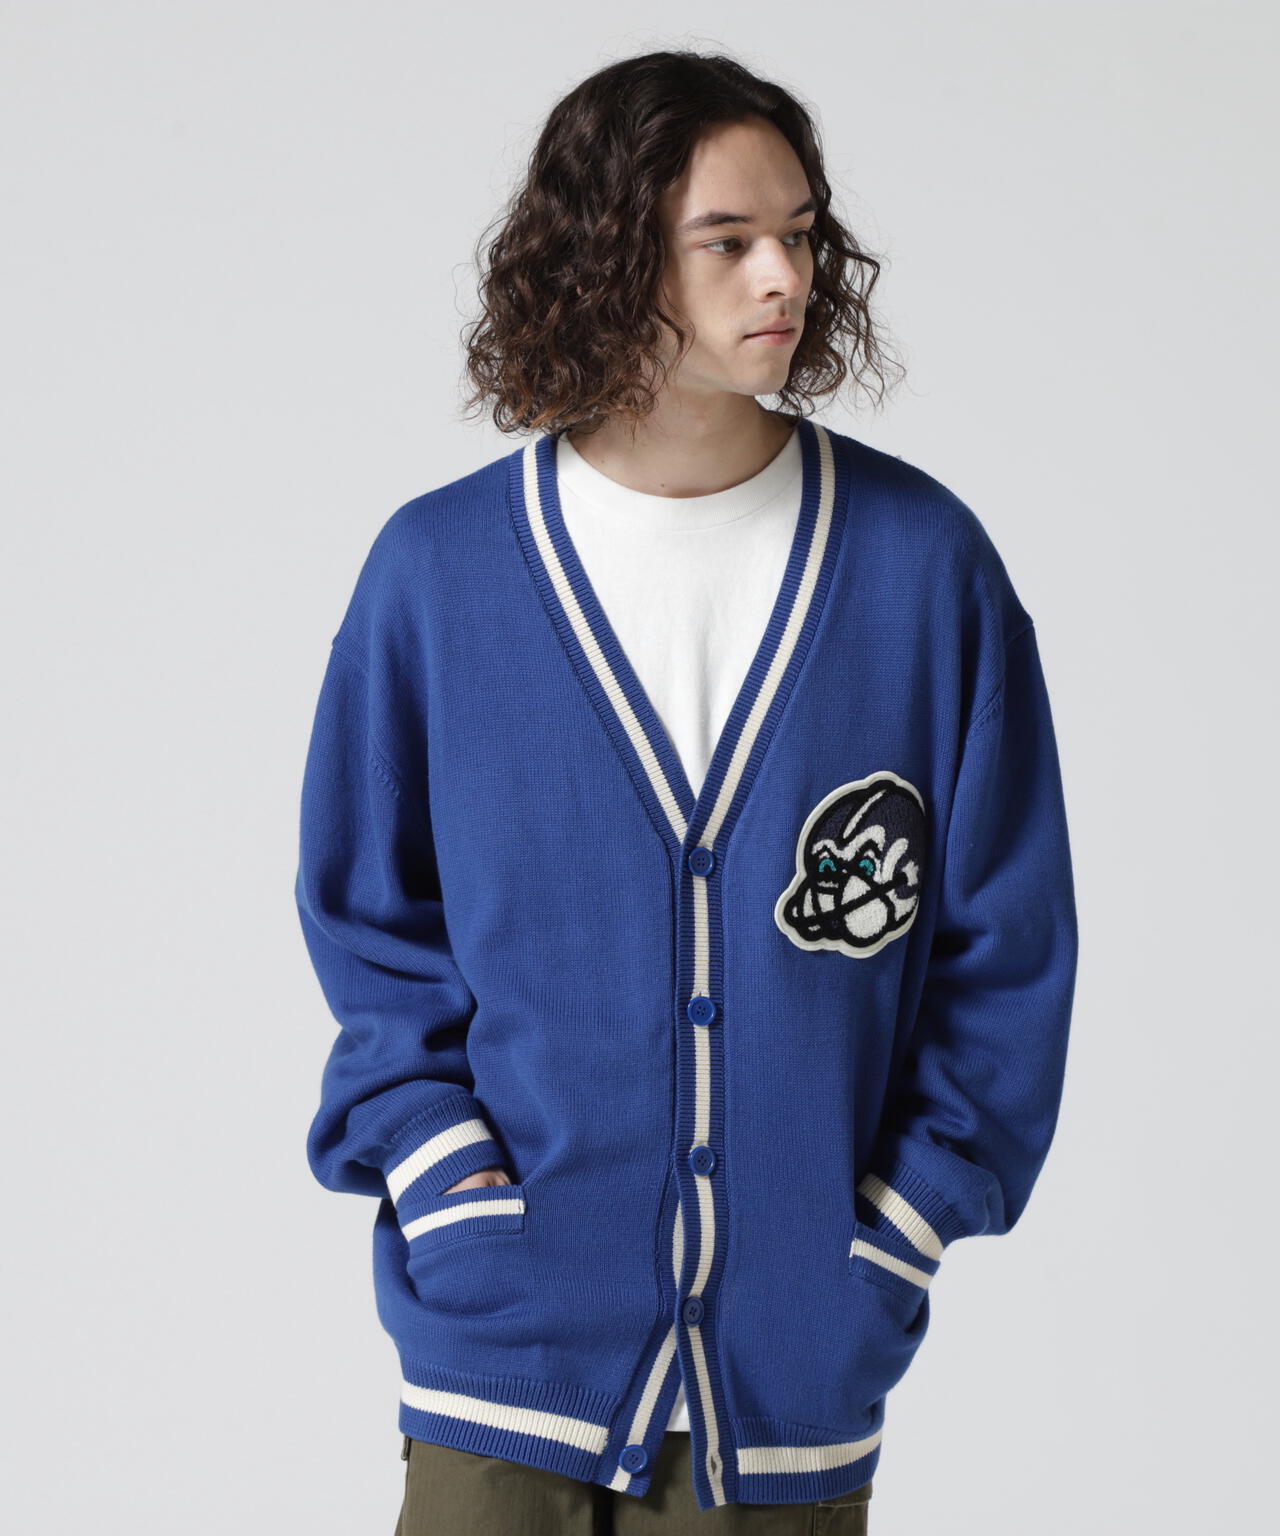 LETTERED CHENILLE PATCH KNIT CARDIGAN / レタード シェニール パッチ ニット カーディガン